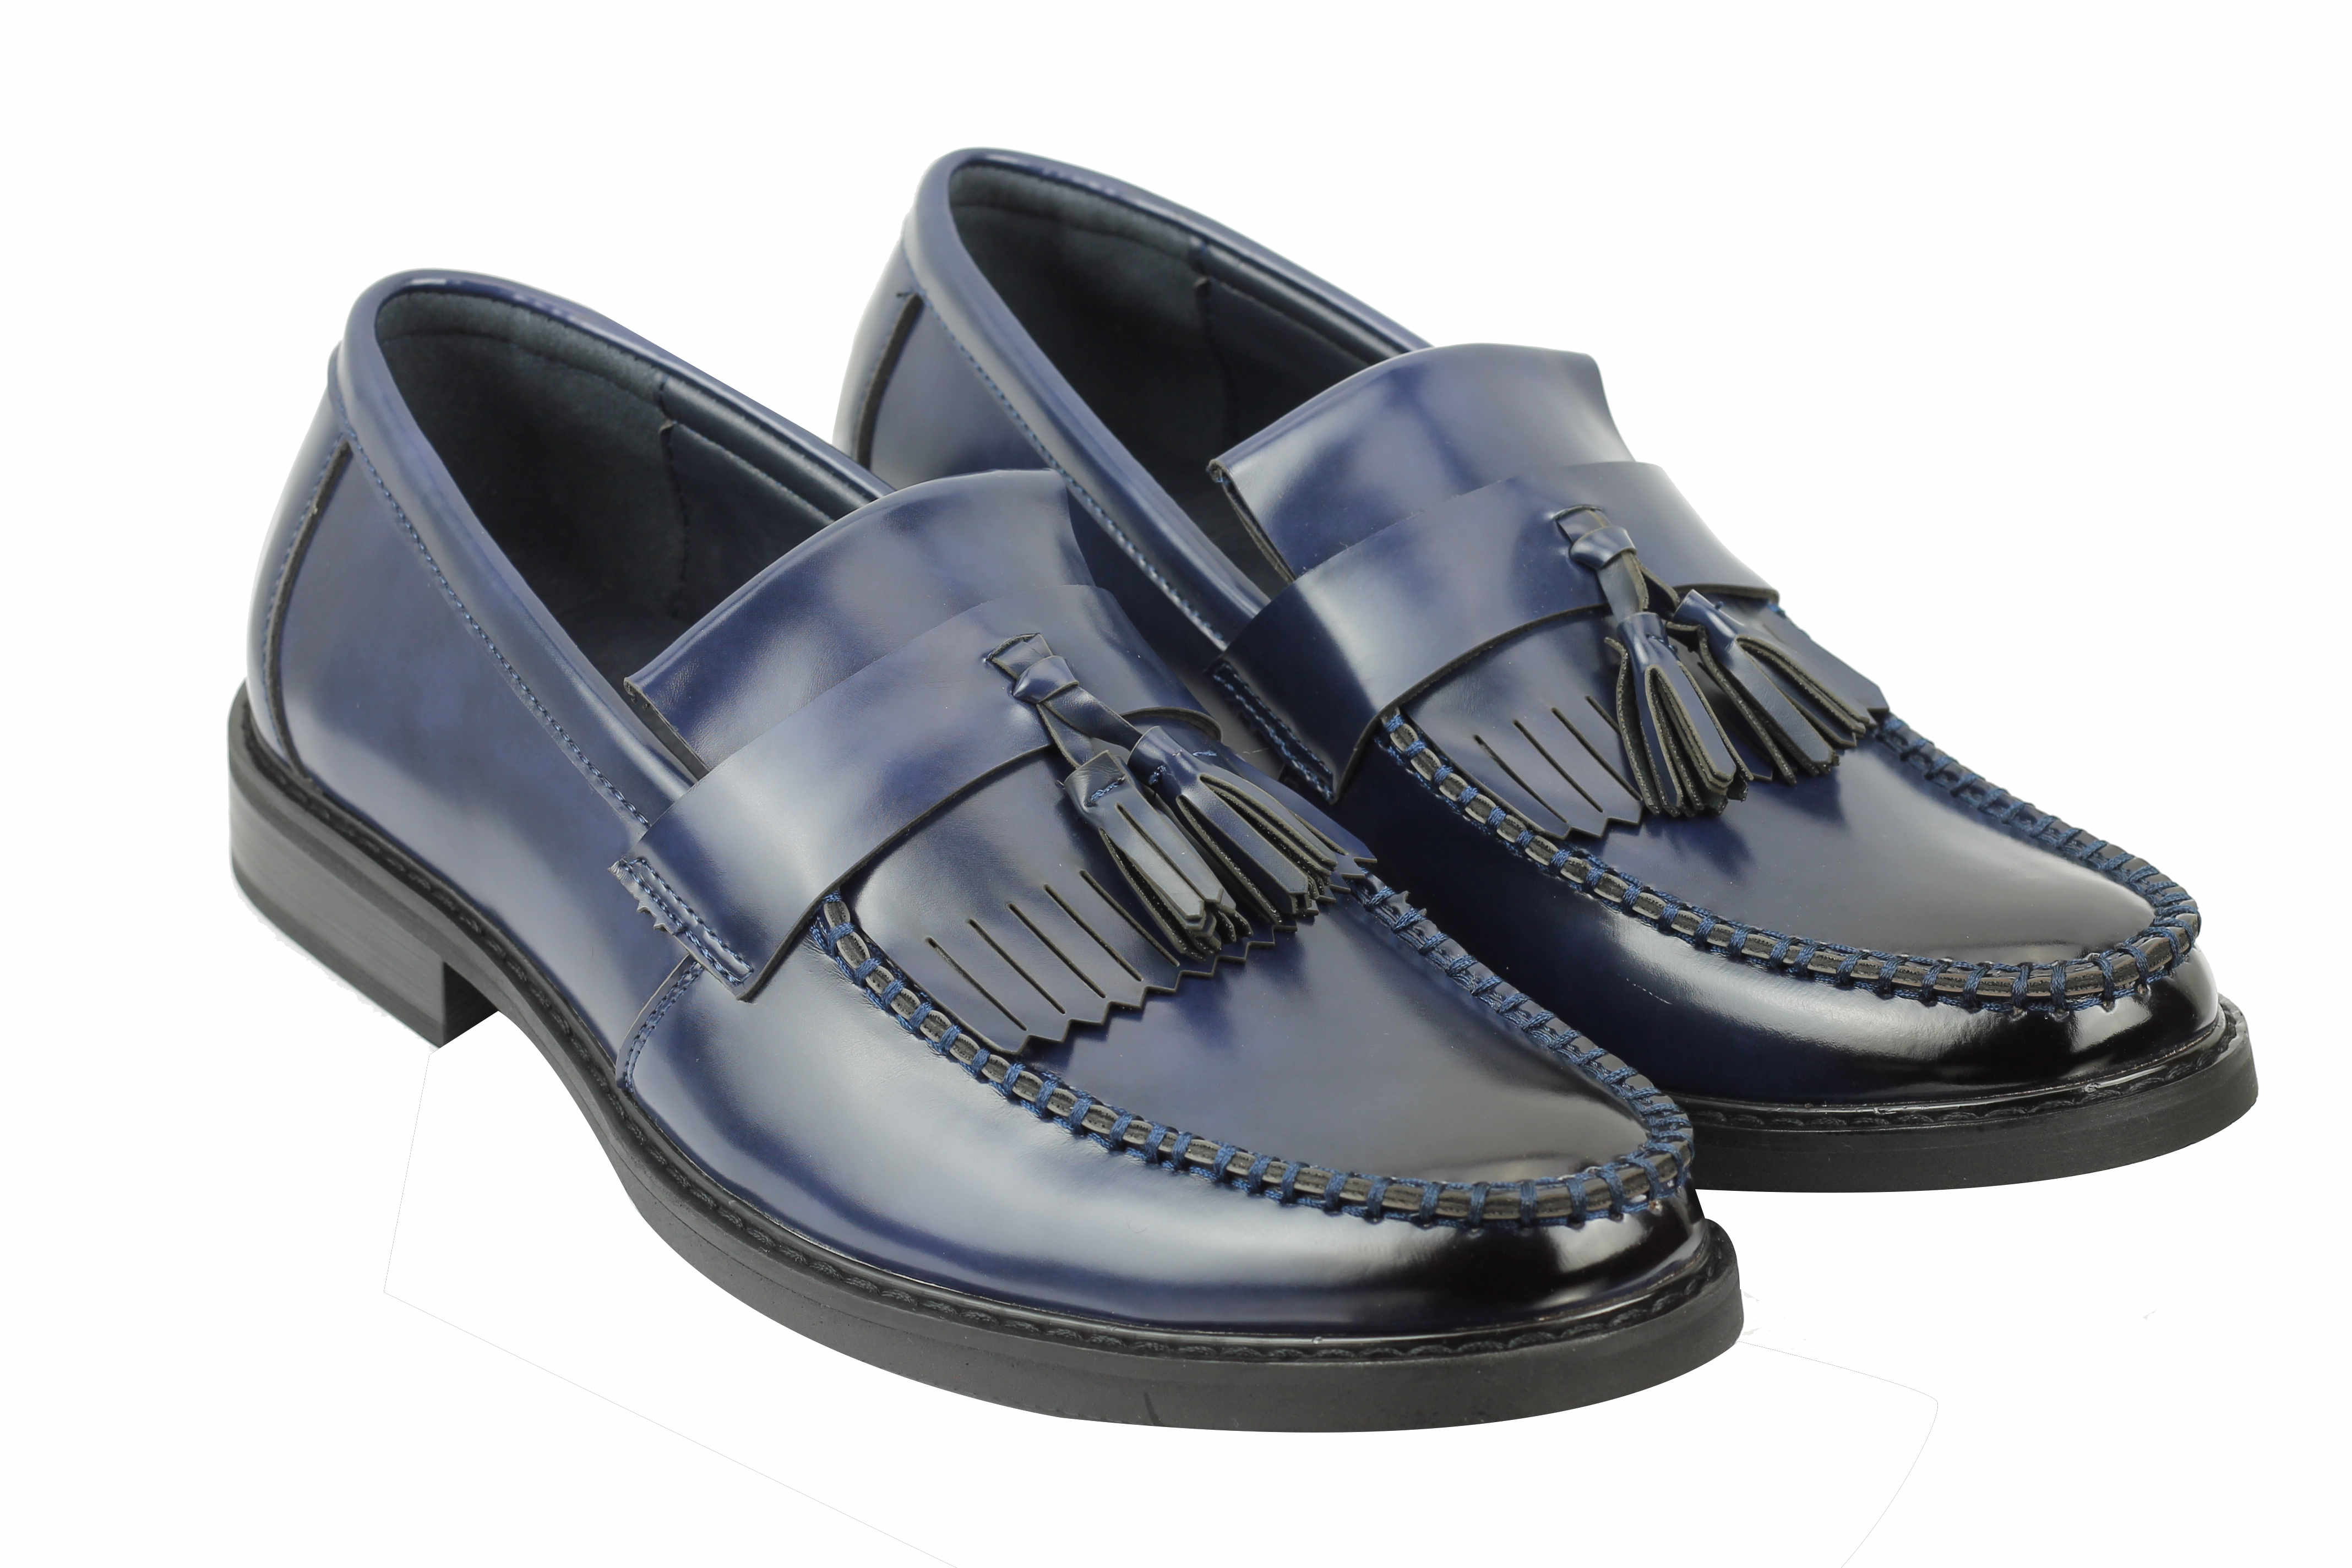 Mens Vintage Style Polished Faux Leather Tassel Loafers Retro MOD Shoes | eBay